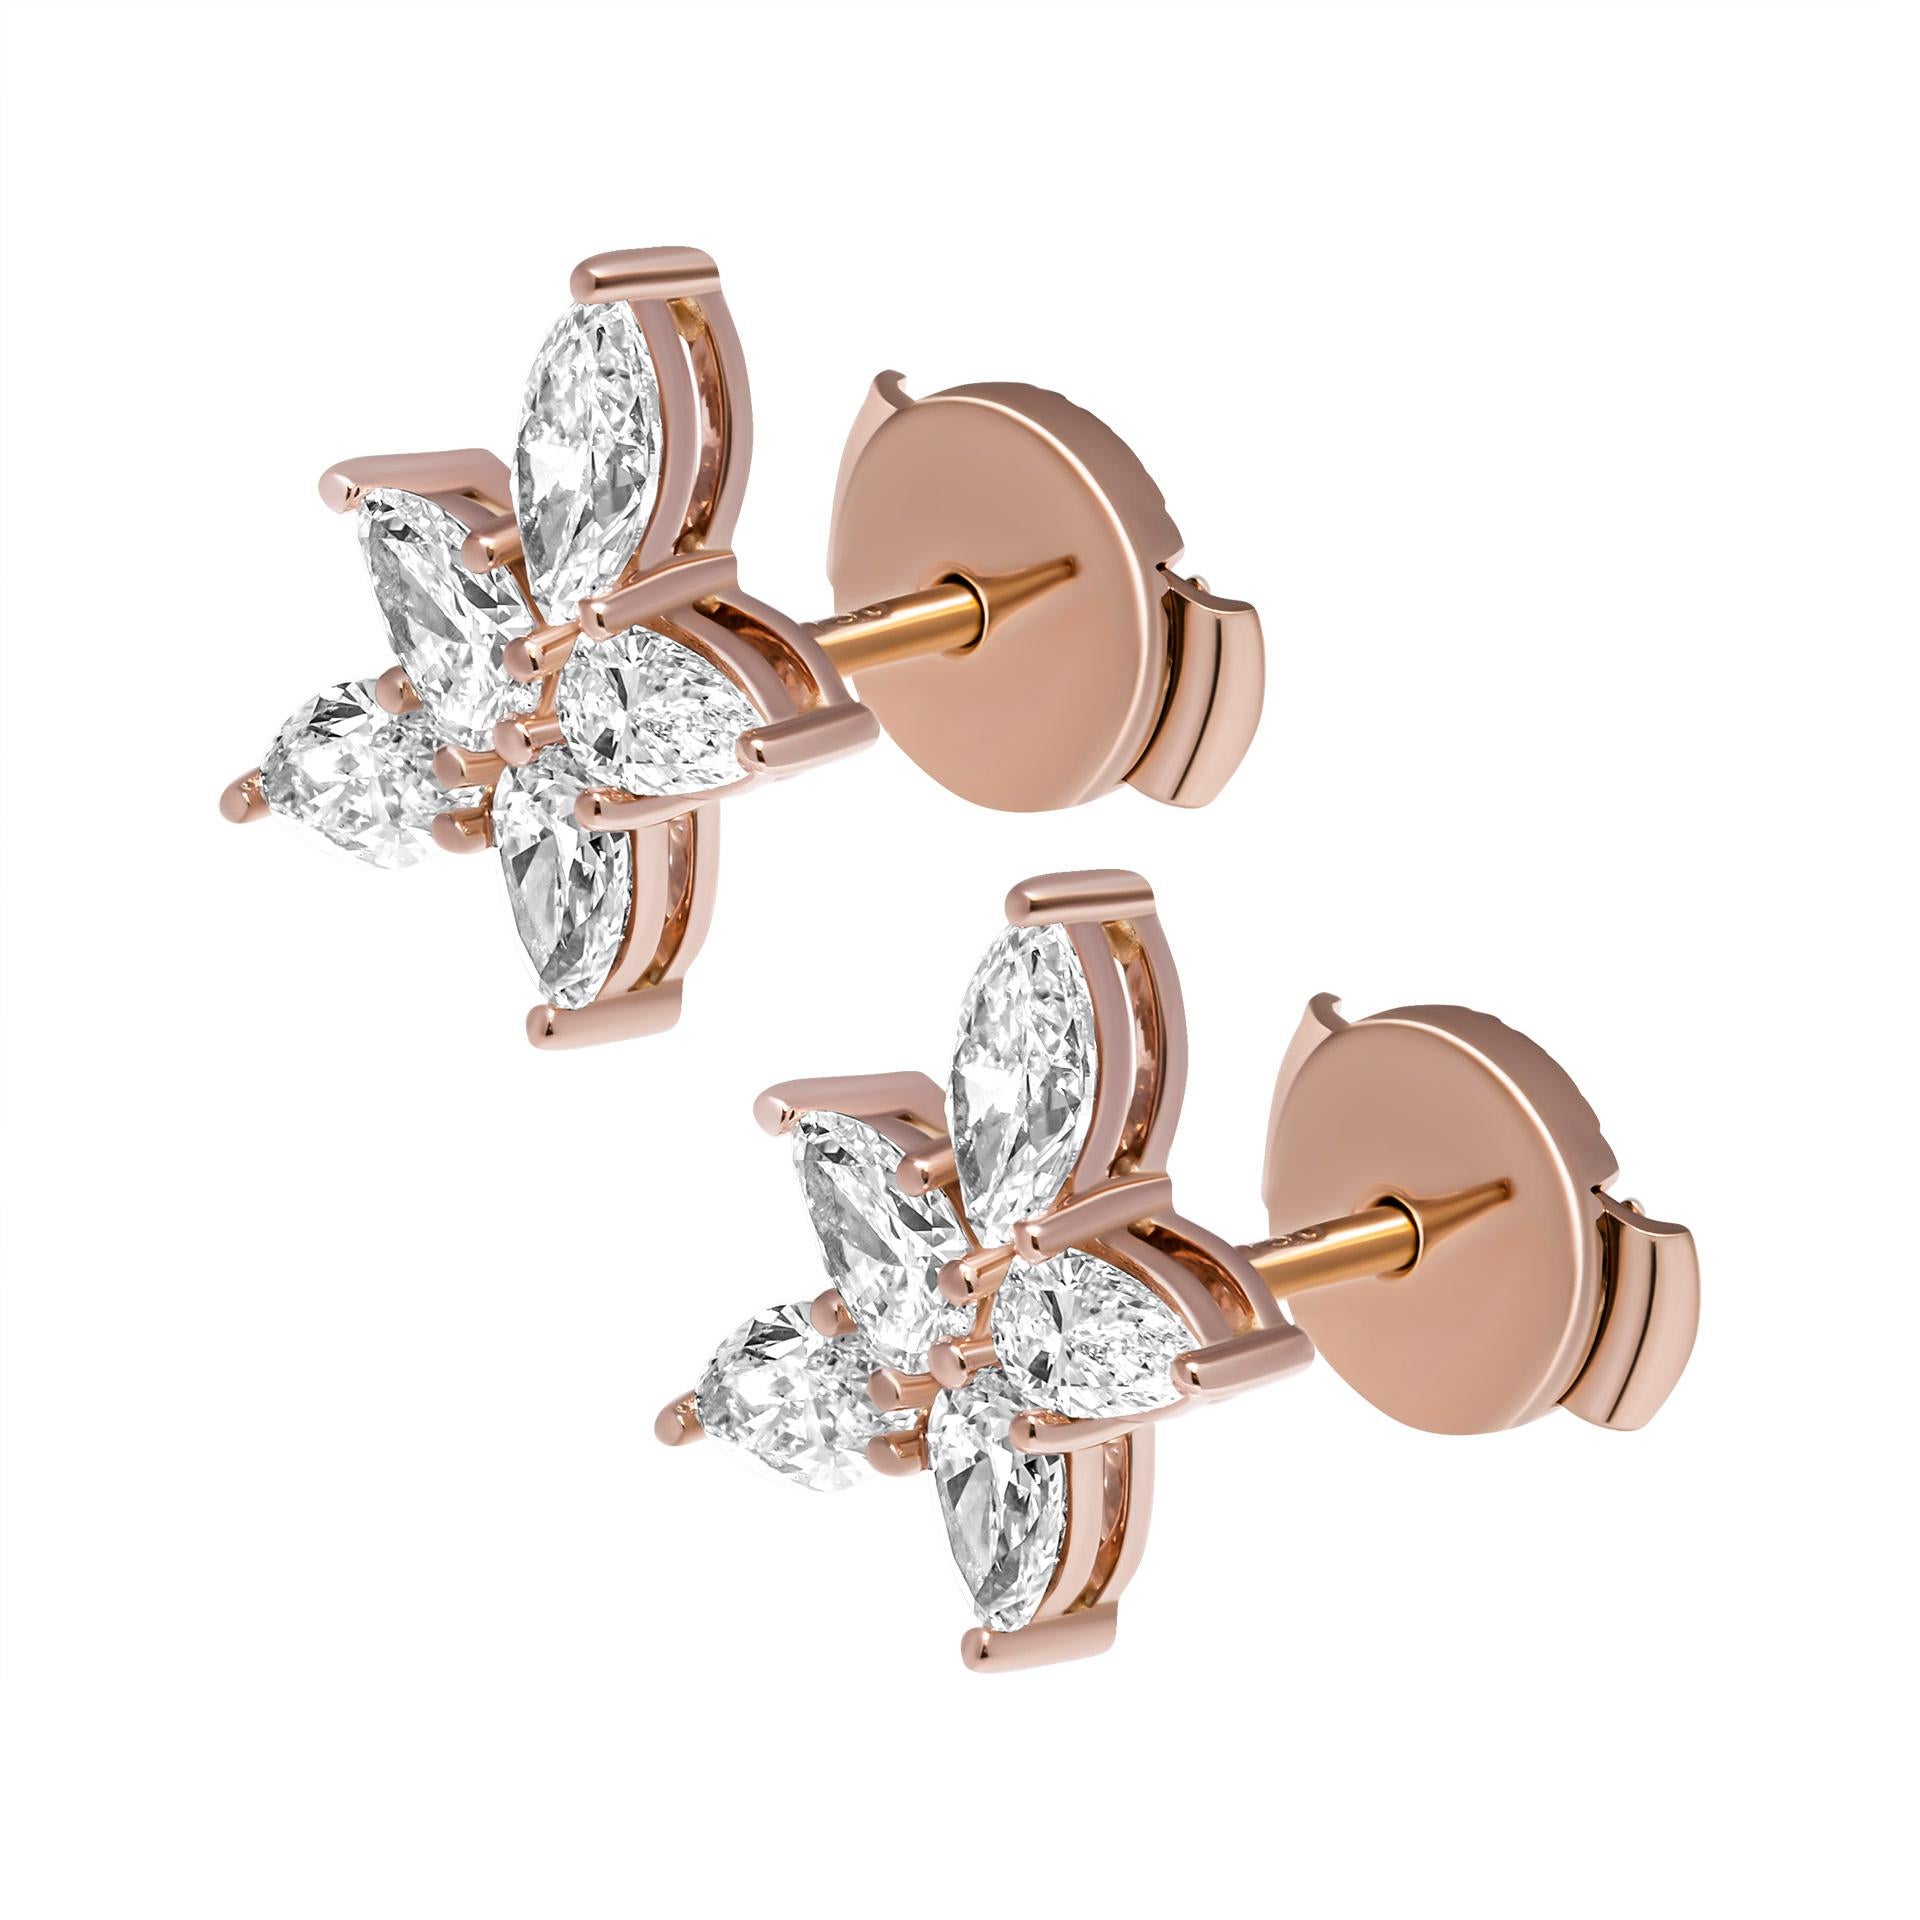 Cluster Earrings in 18K Rose Gold
with mixed shaped diamonds
4st marquee totaling 0.58ct F/G color VS clarity
6st pear shapes totaling 0.61ct F/G color VS clarity

Pressure Back lock system 
